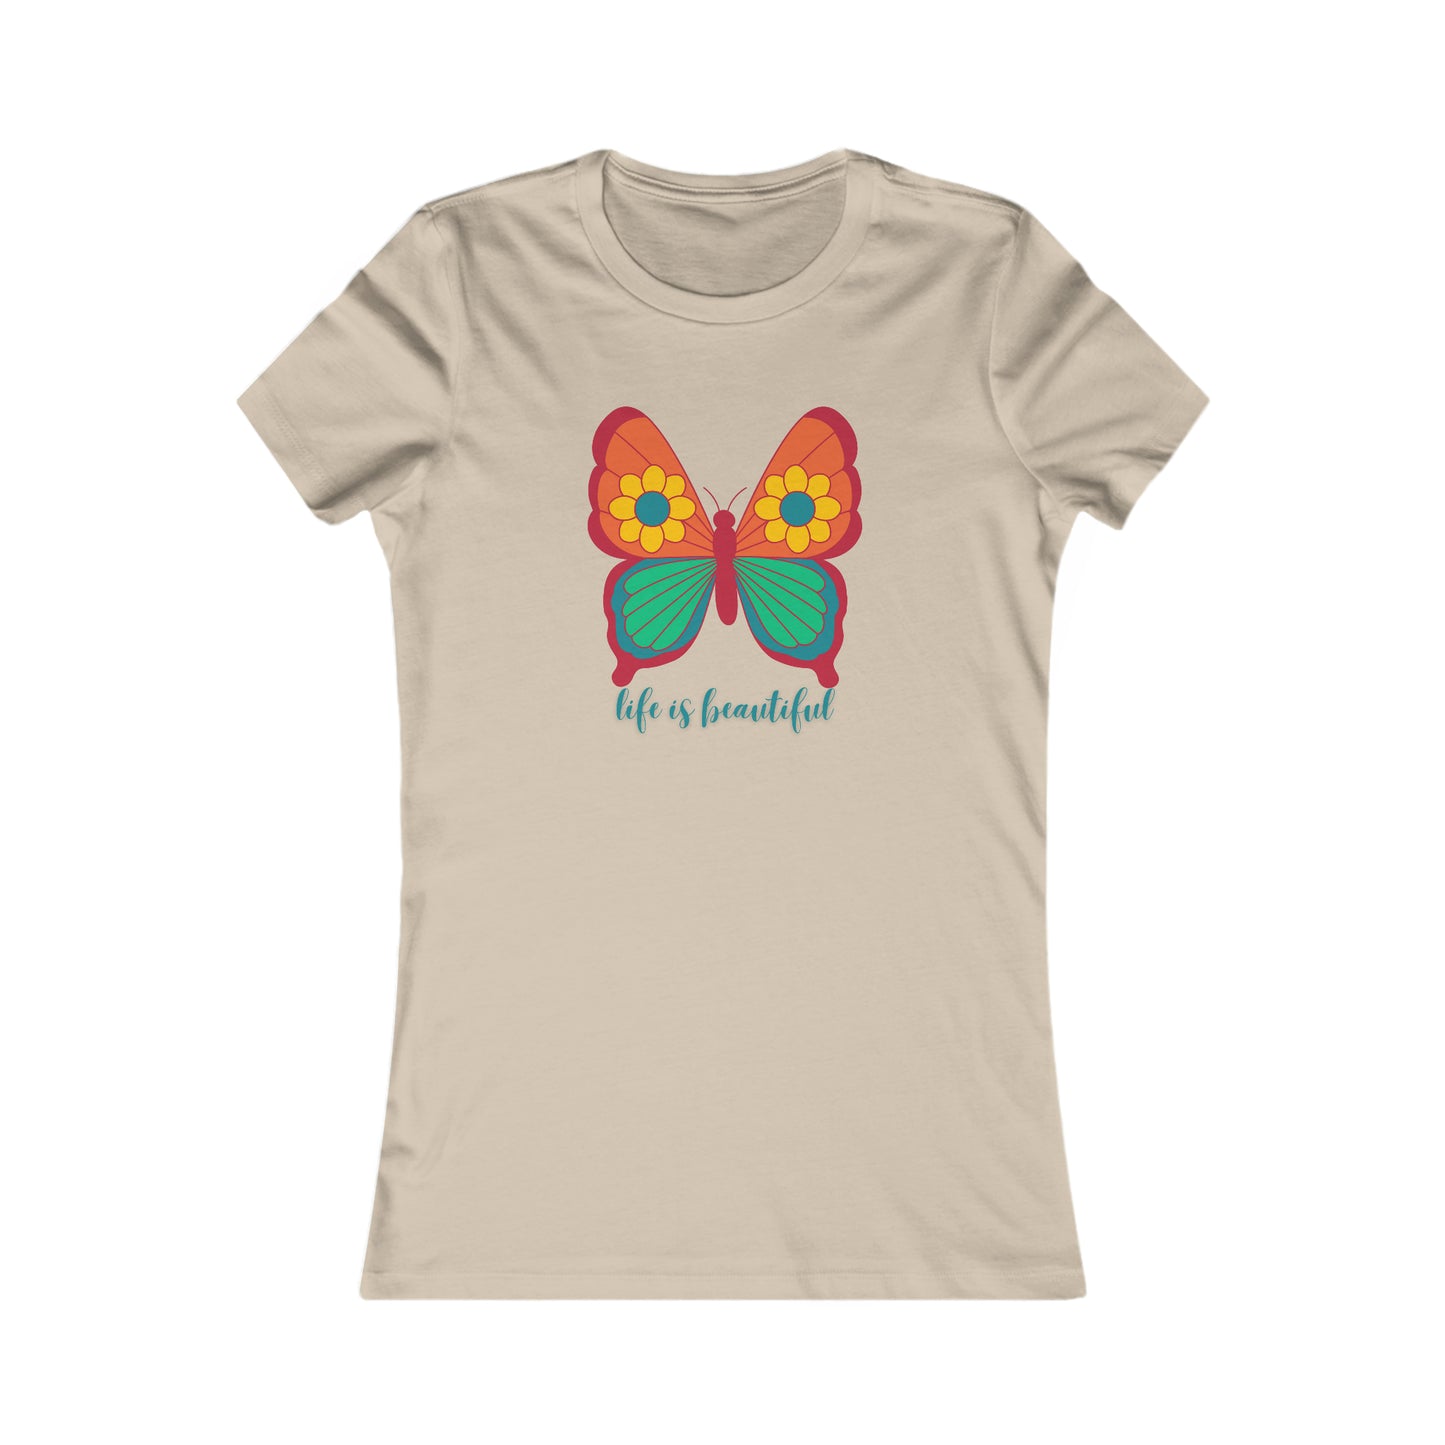 Colorful butterfly above a message of  “life is beautiful” in the center of this Women's Favorite Tee design. Slim fit so please check the size table.